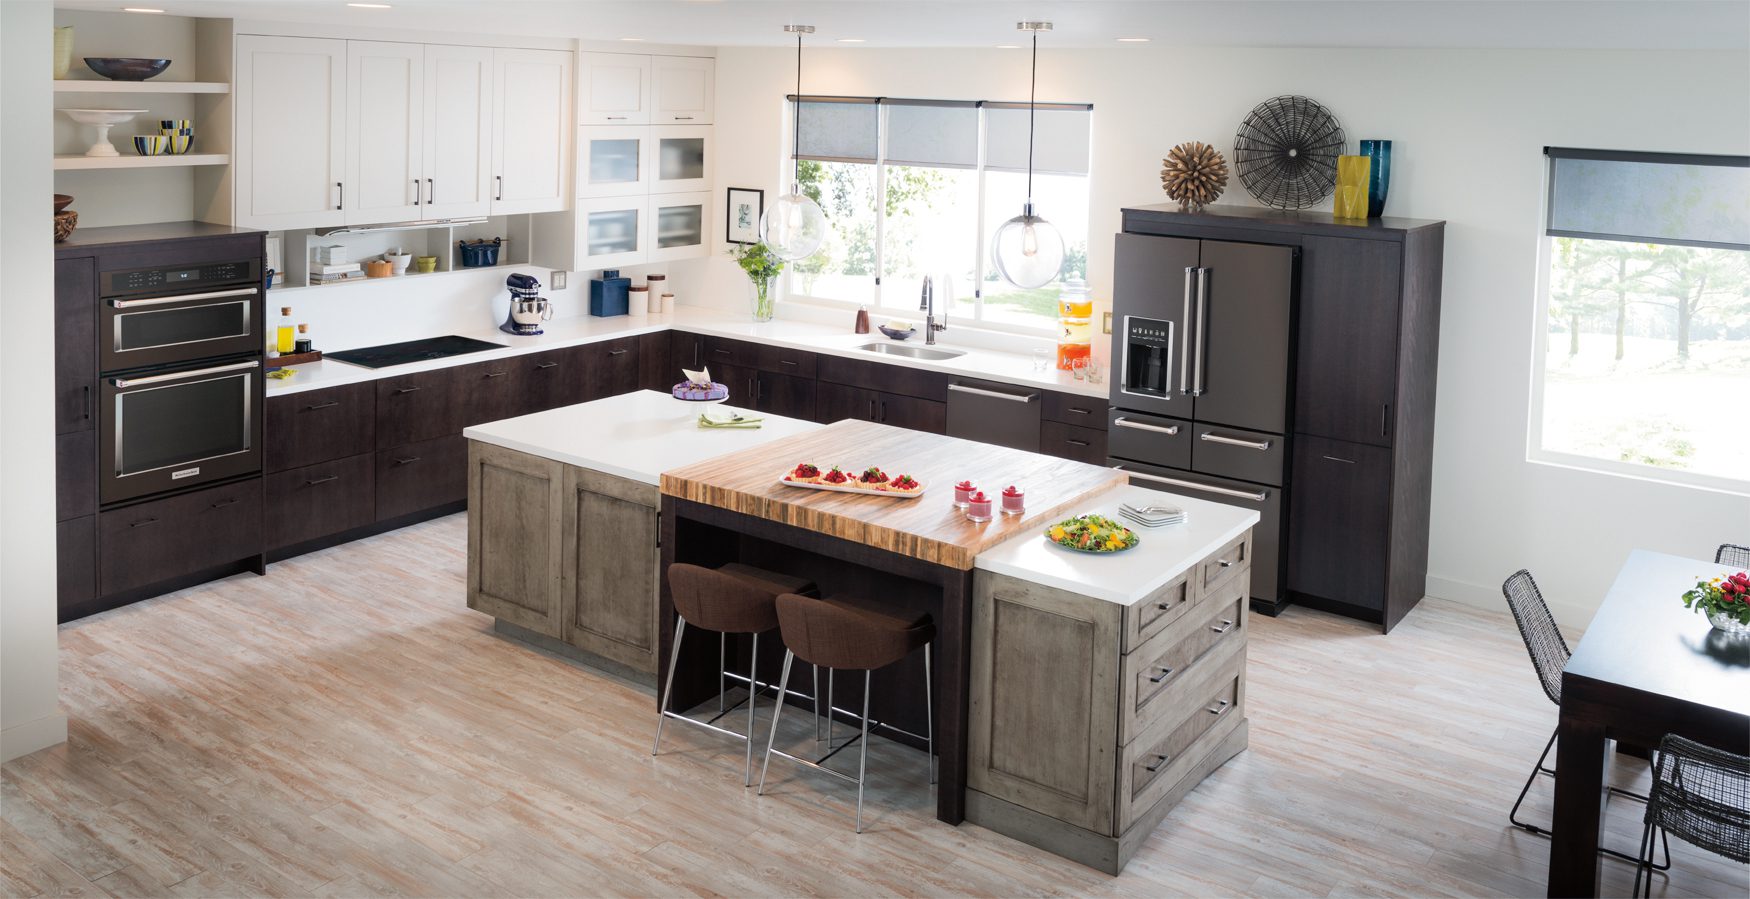 NEW Black Stainless KitchenAid Suite of Appliances at Best Buy – Just In Time for the Holidays!